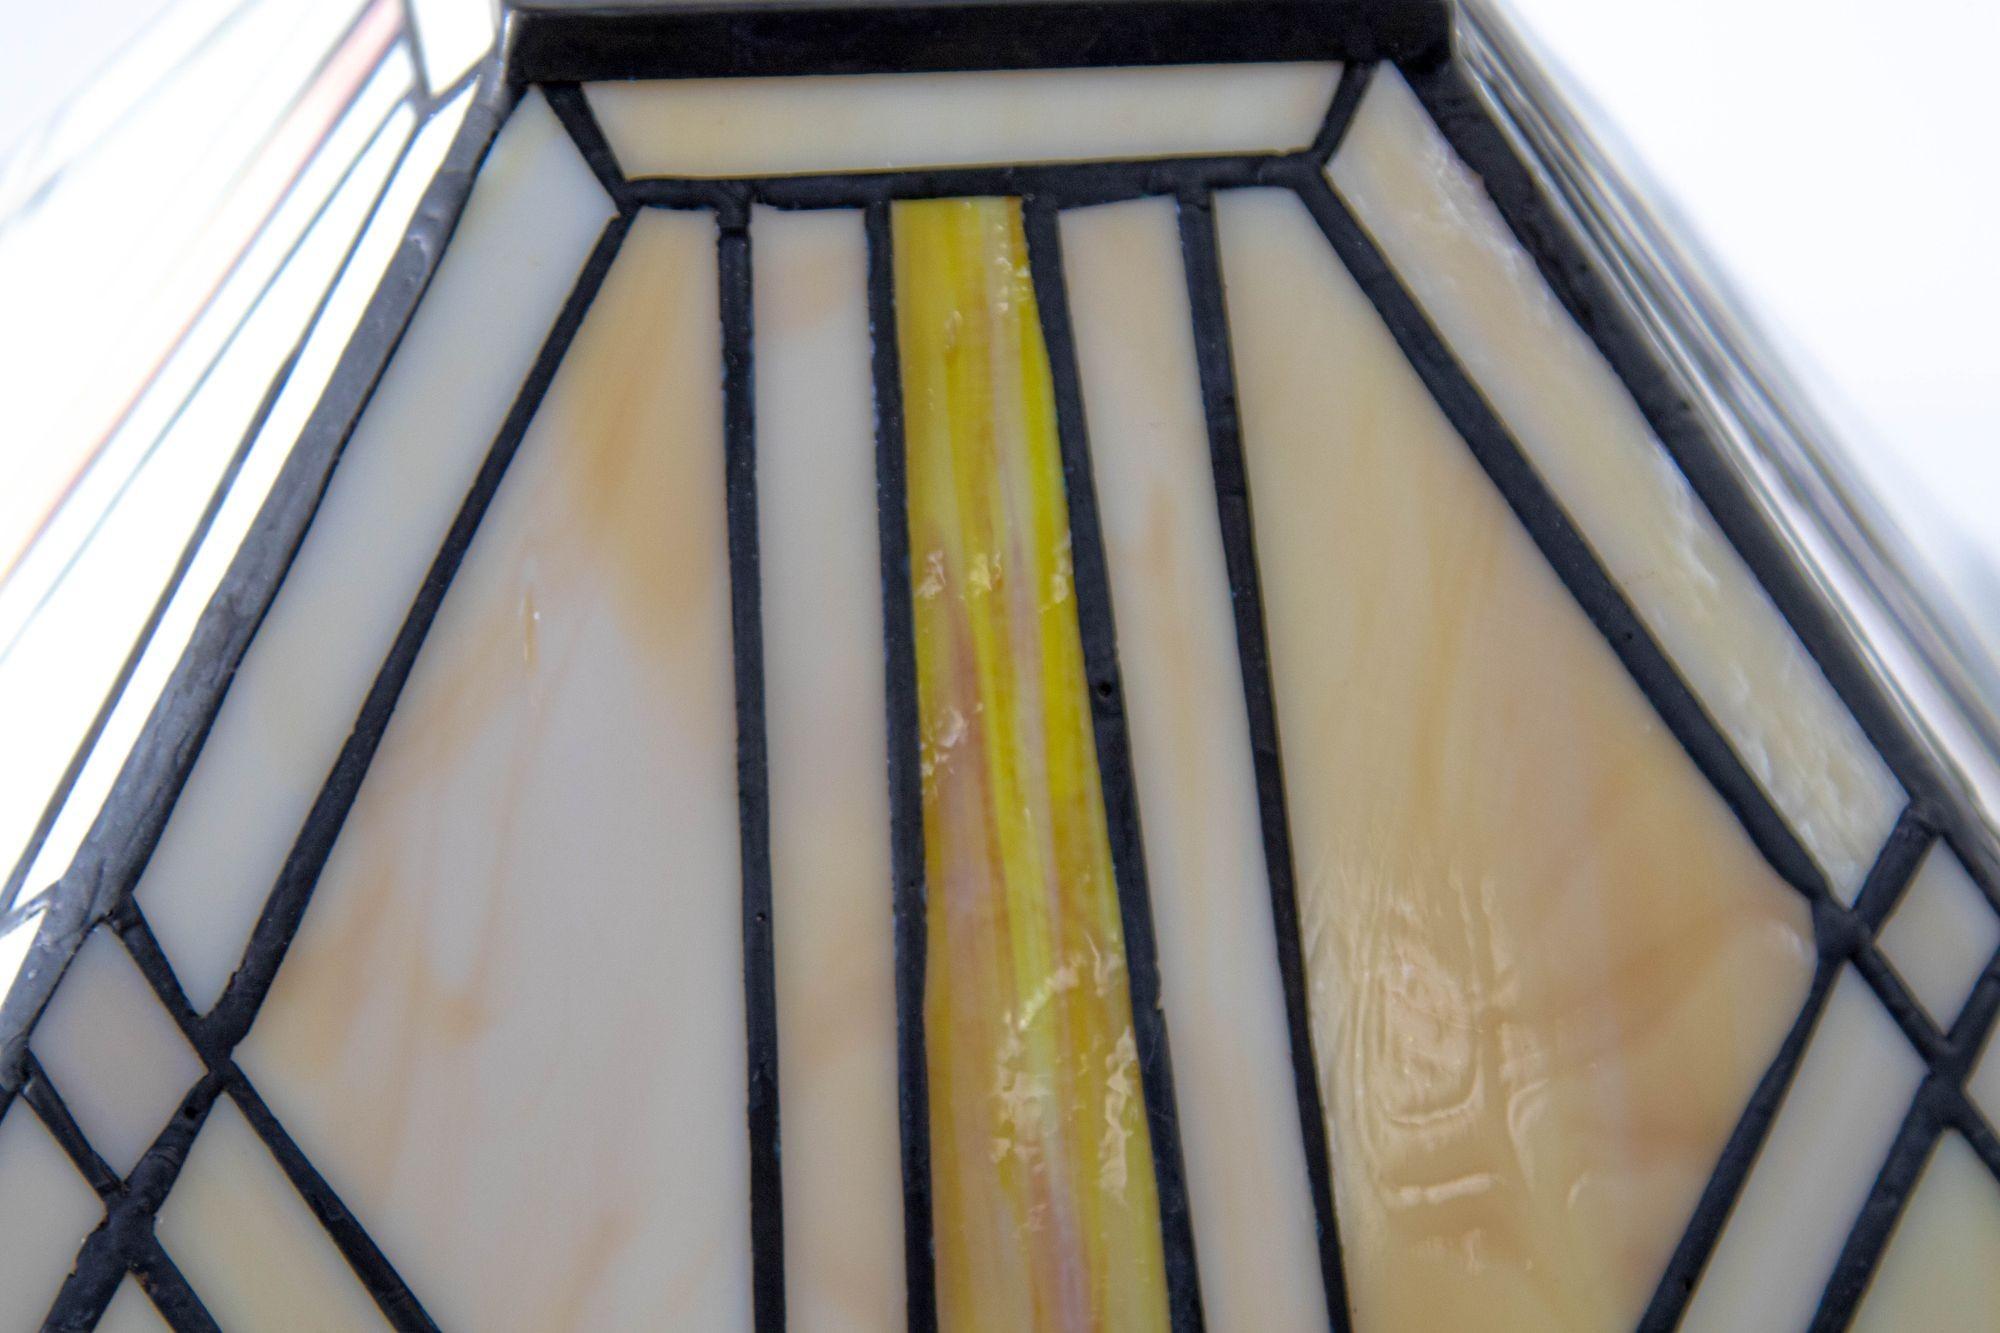 mission style stained glass lamp shades